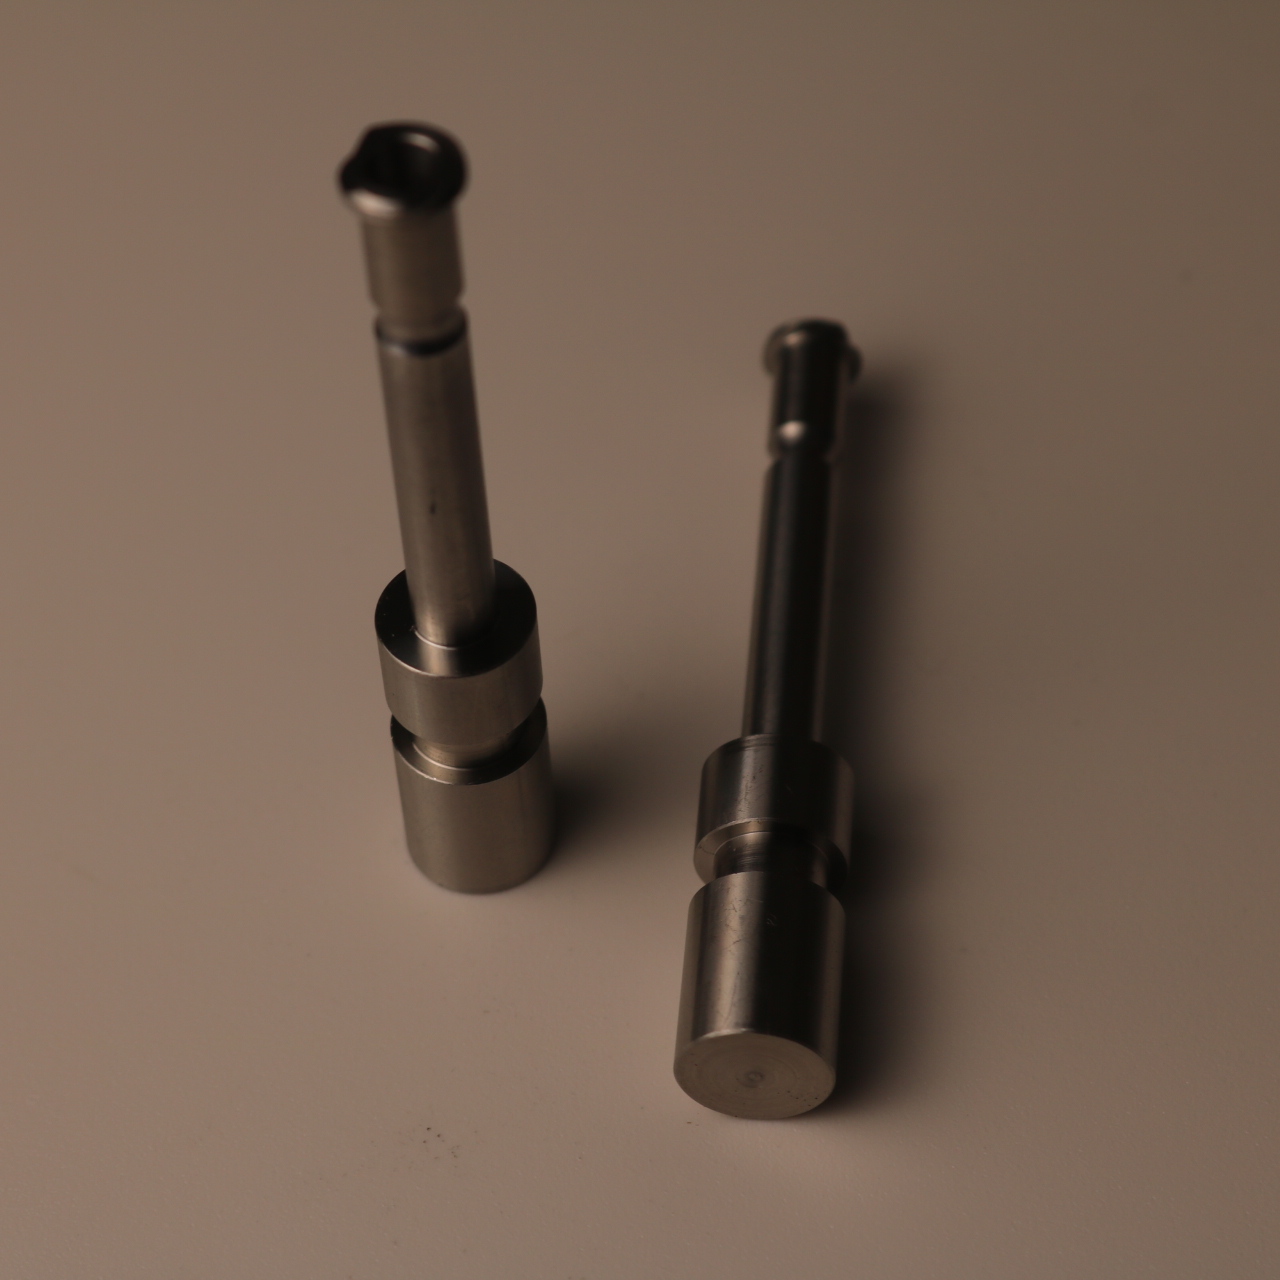 CNC Lathe Machining Services for Medical Parts